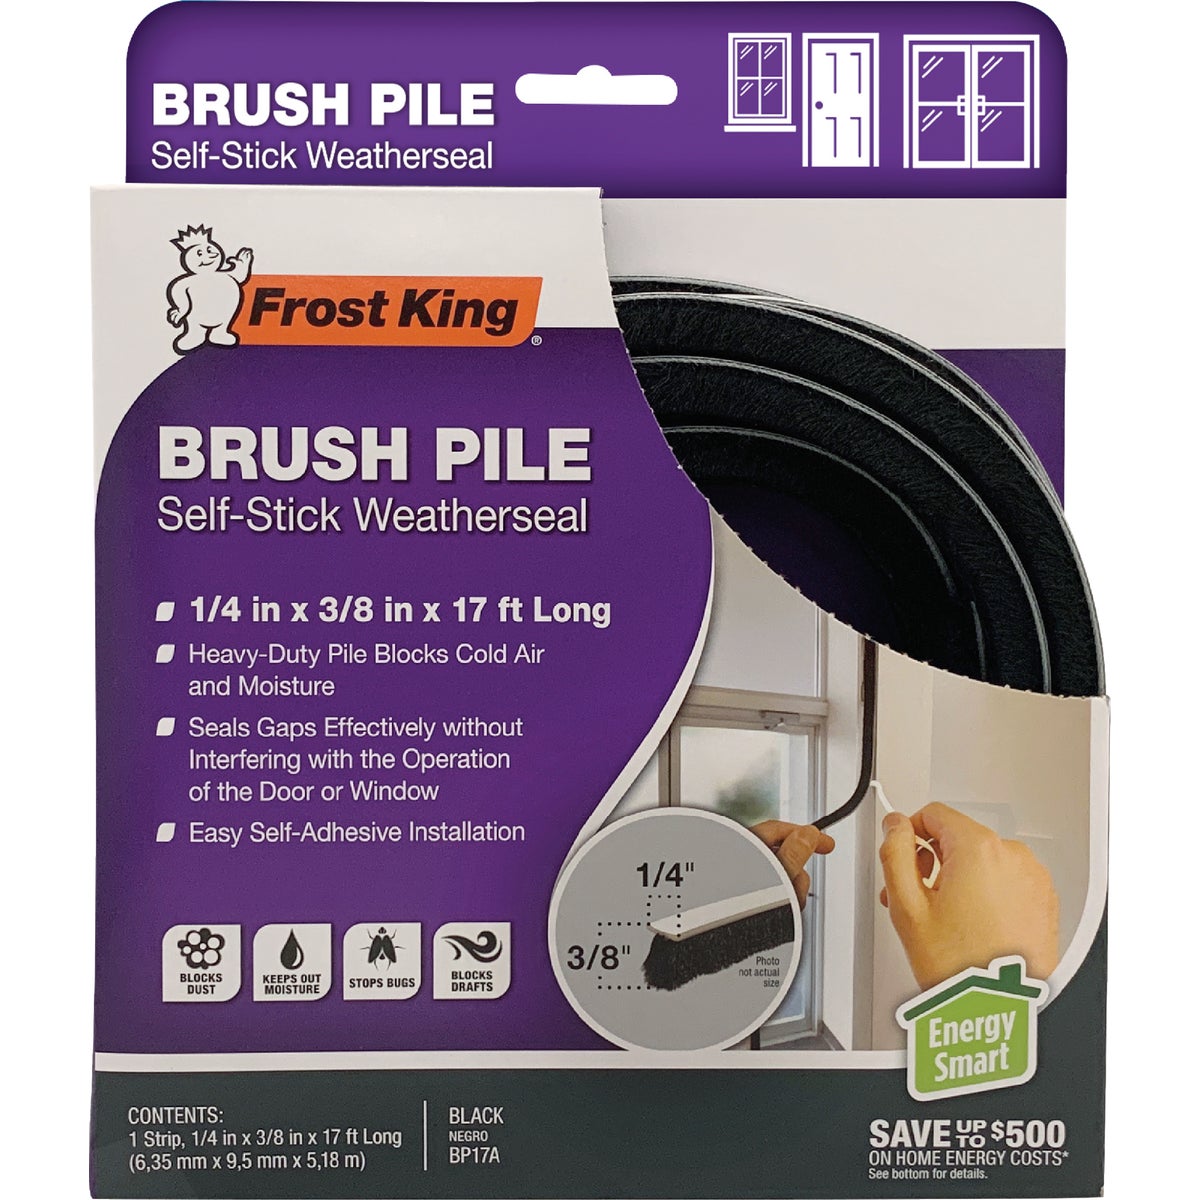 Frost King 1/4 In. x 3/8 In. x 17 Ft. Brush Pile Self-Stick Weatherseal